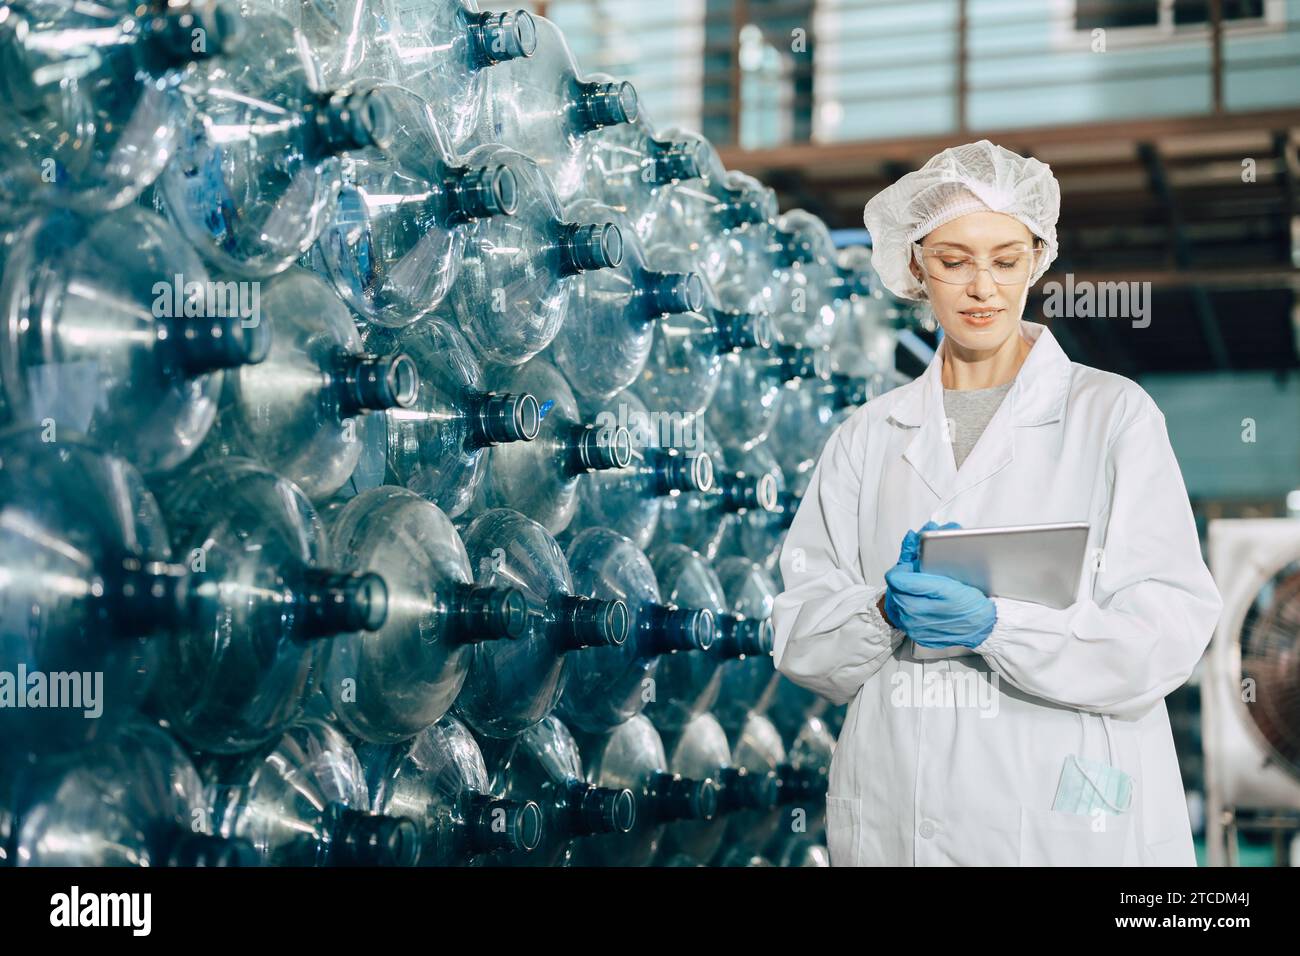 Women worker working in drinking water factory inspect counting bottle stock warehouse check counting with hygiene uniform. Stock Photo